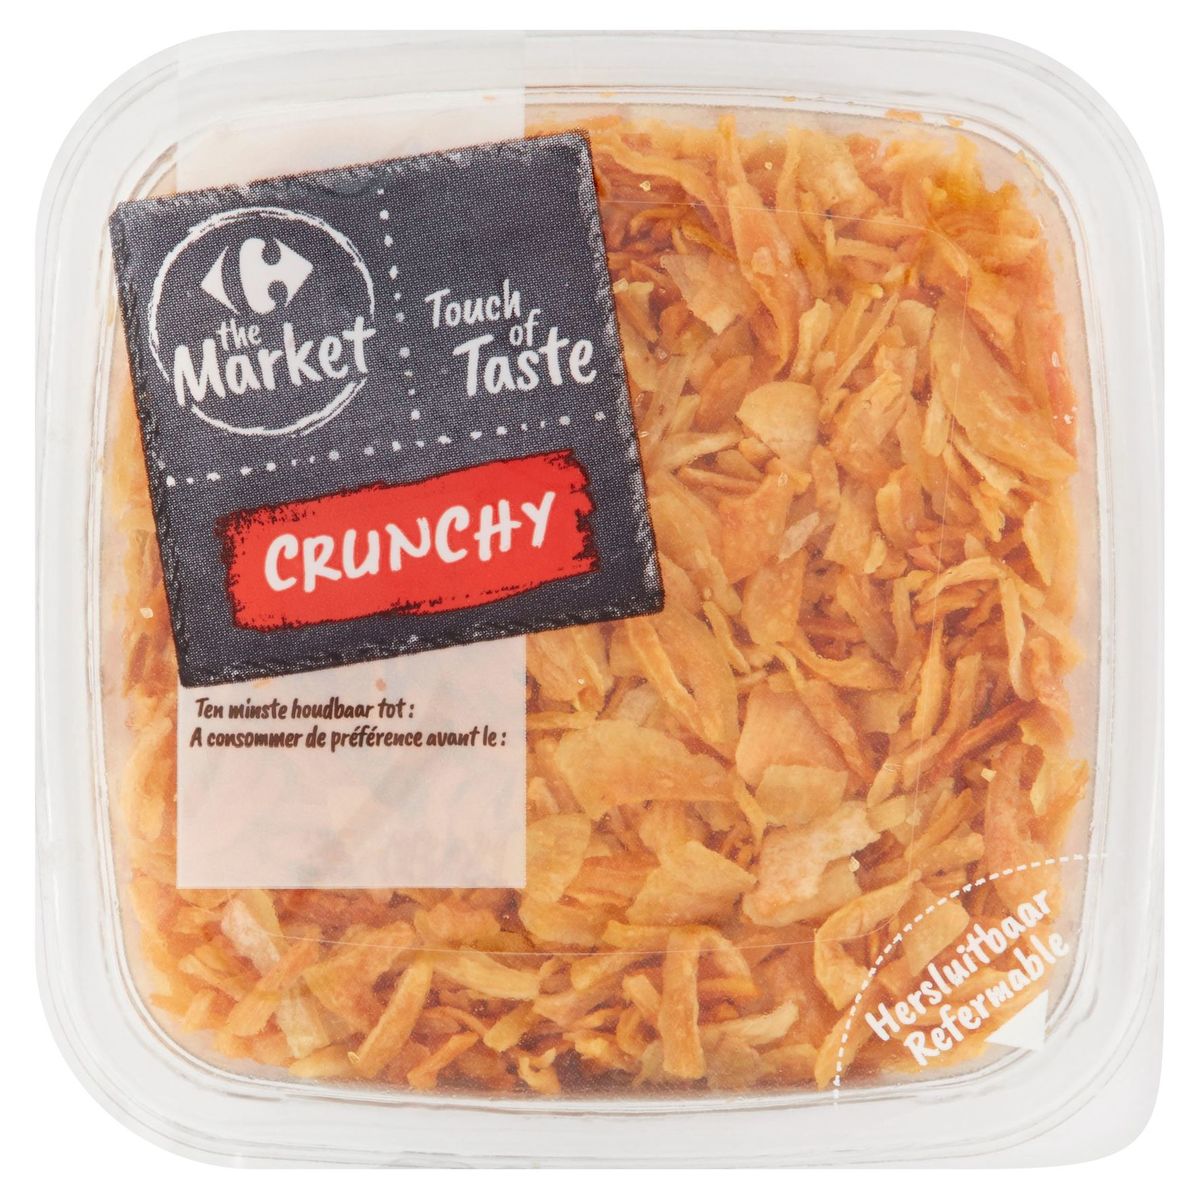 Carrefour The Market Touch of Taste Crunchy Oignons Frits 100 g